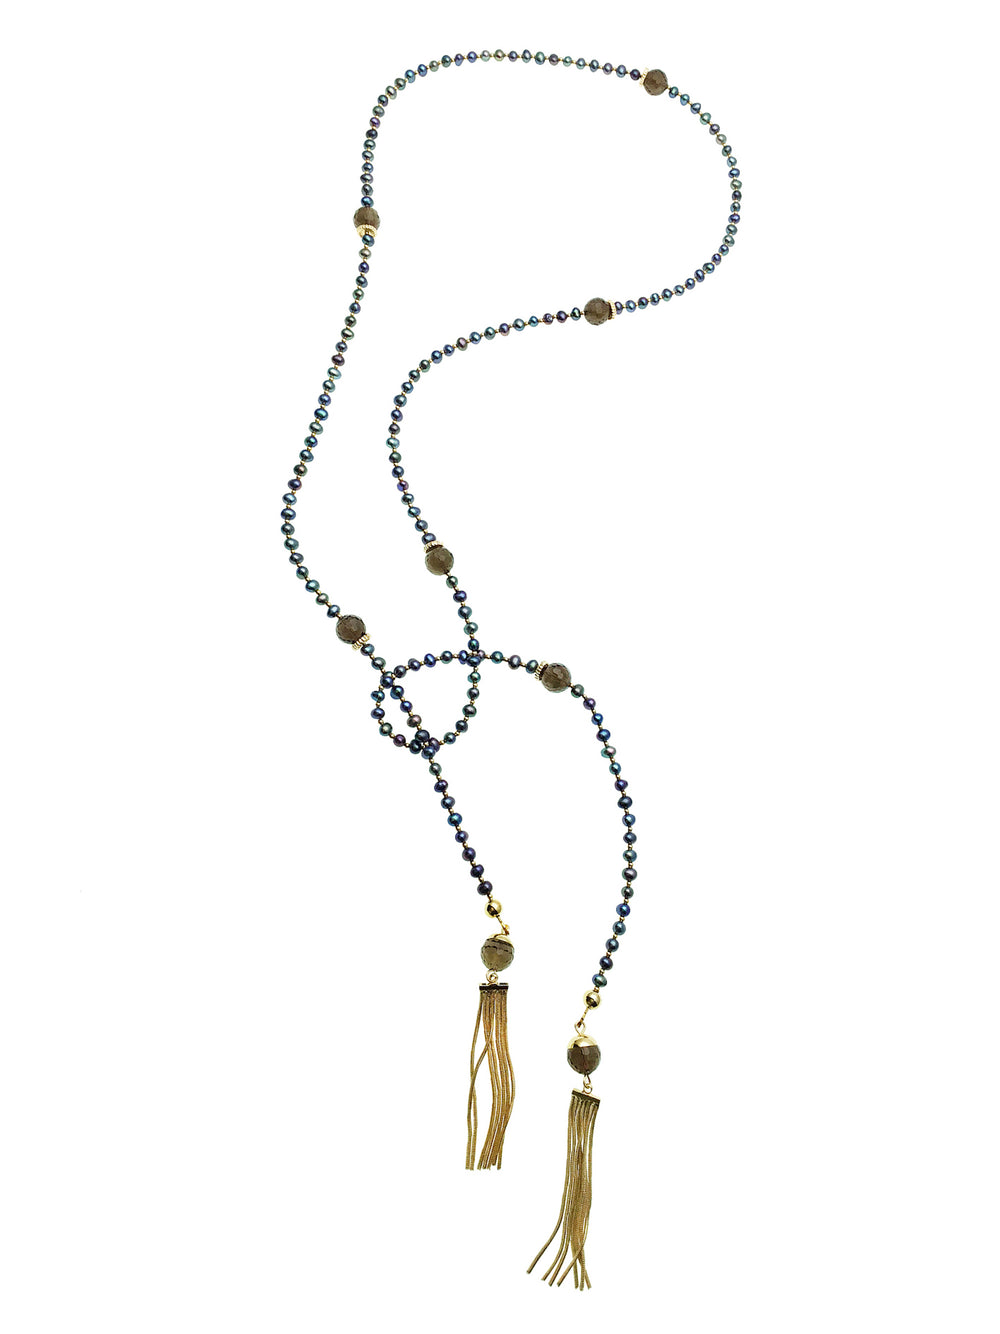 Freshwater pearls with smoky quartz  Open Ended Long Necklace CN046 - FARRA